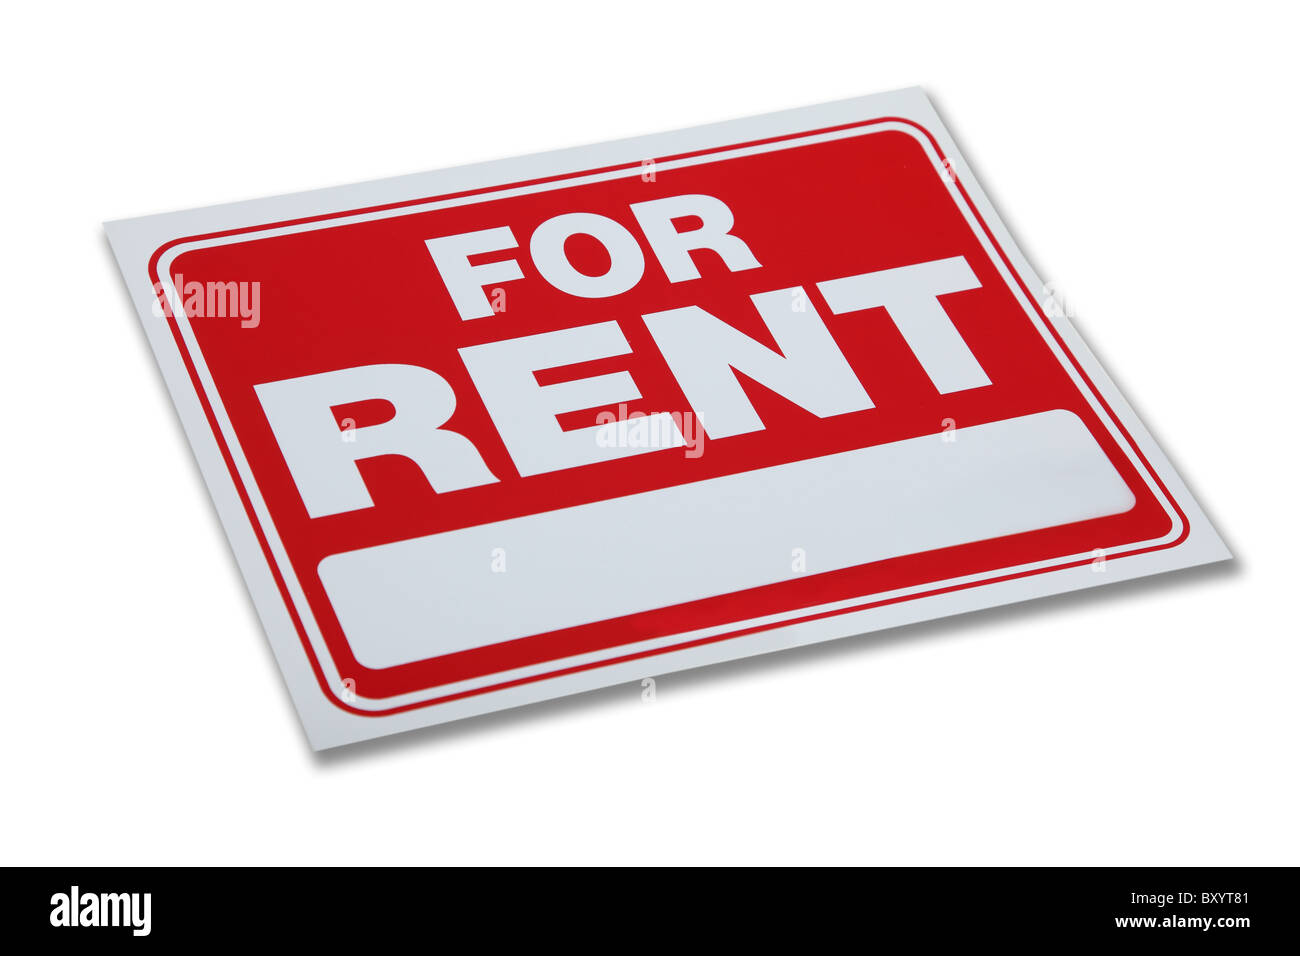 For Rent sign on white background Stock Photo